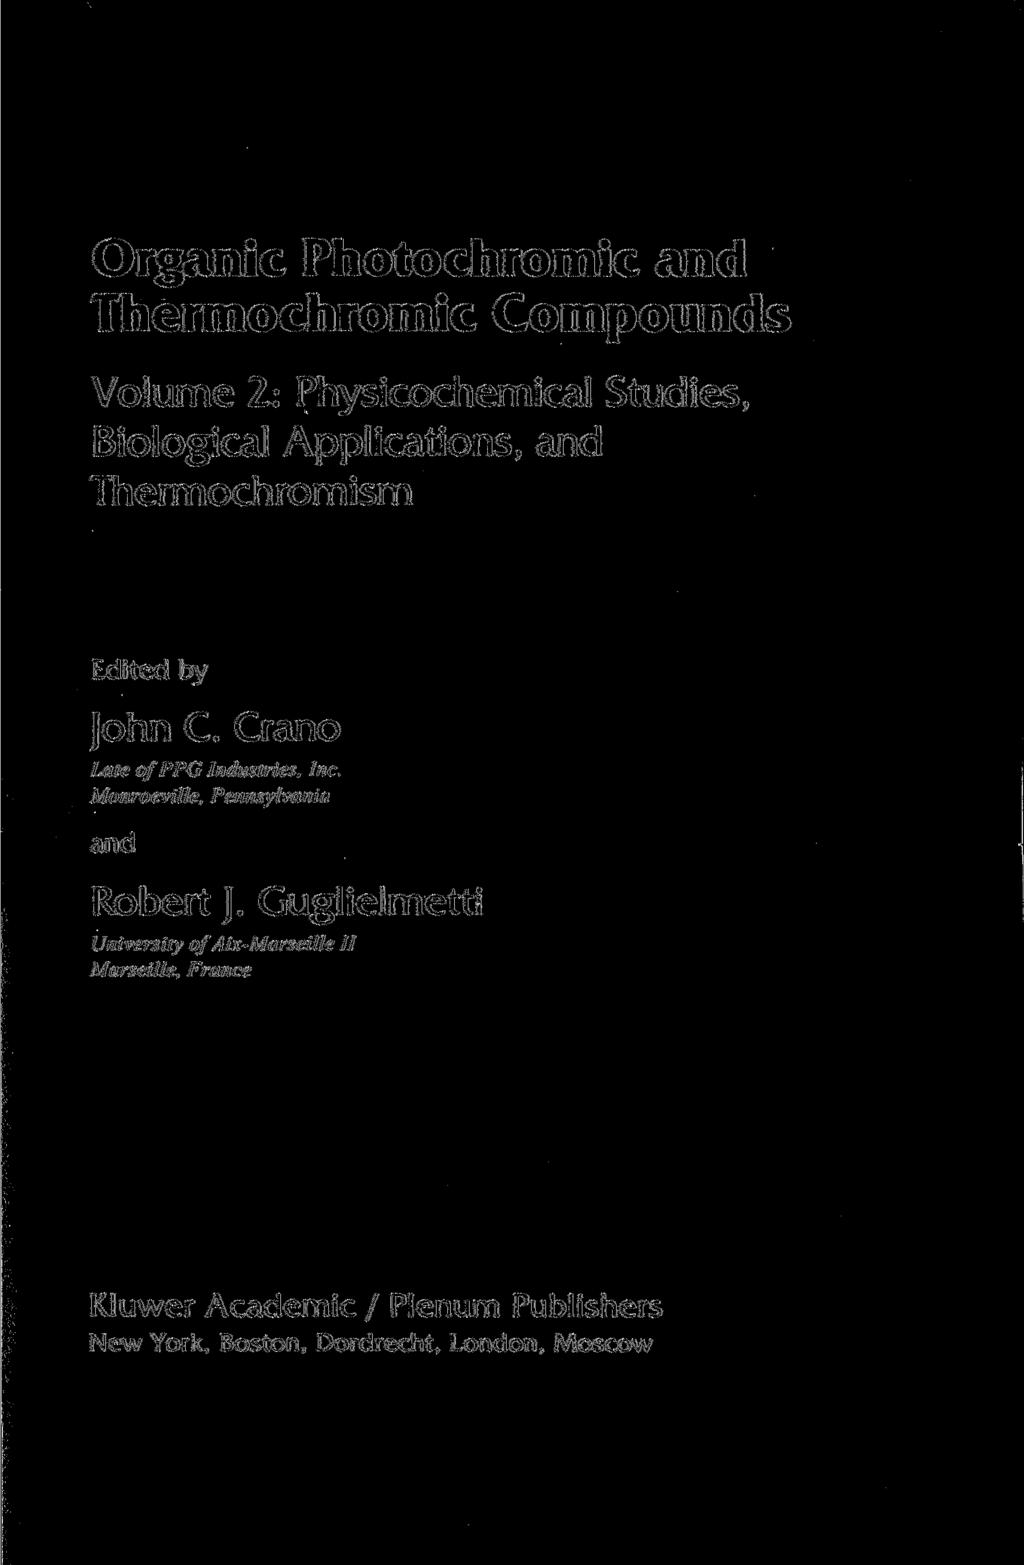 Organic Photochromic and Thermochromic Compounds Volume 2: Physicochemical Studies, Biological Applications, and Thermochromism Edited by John C. Crano Late of PPG Industries, Inc.